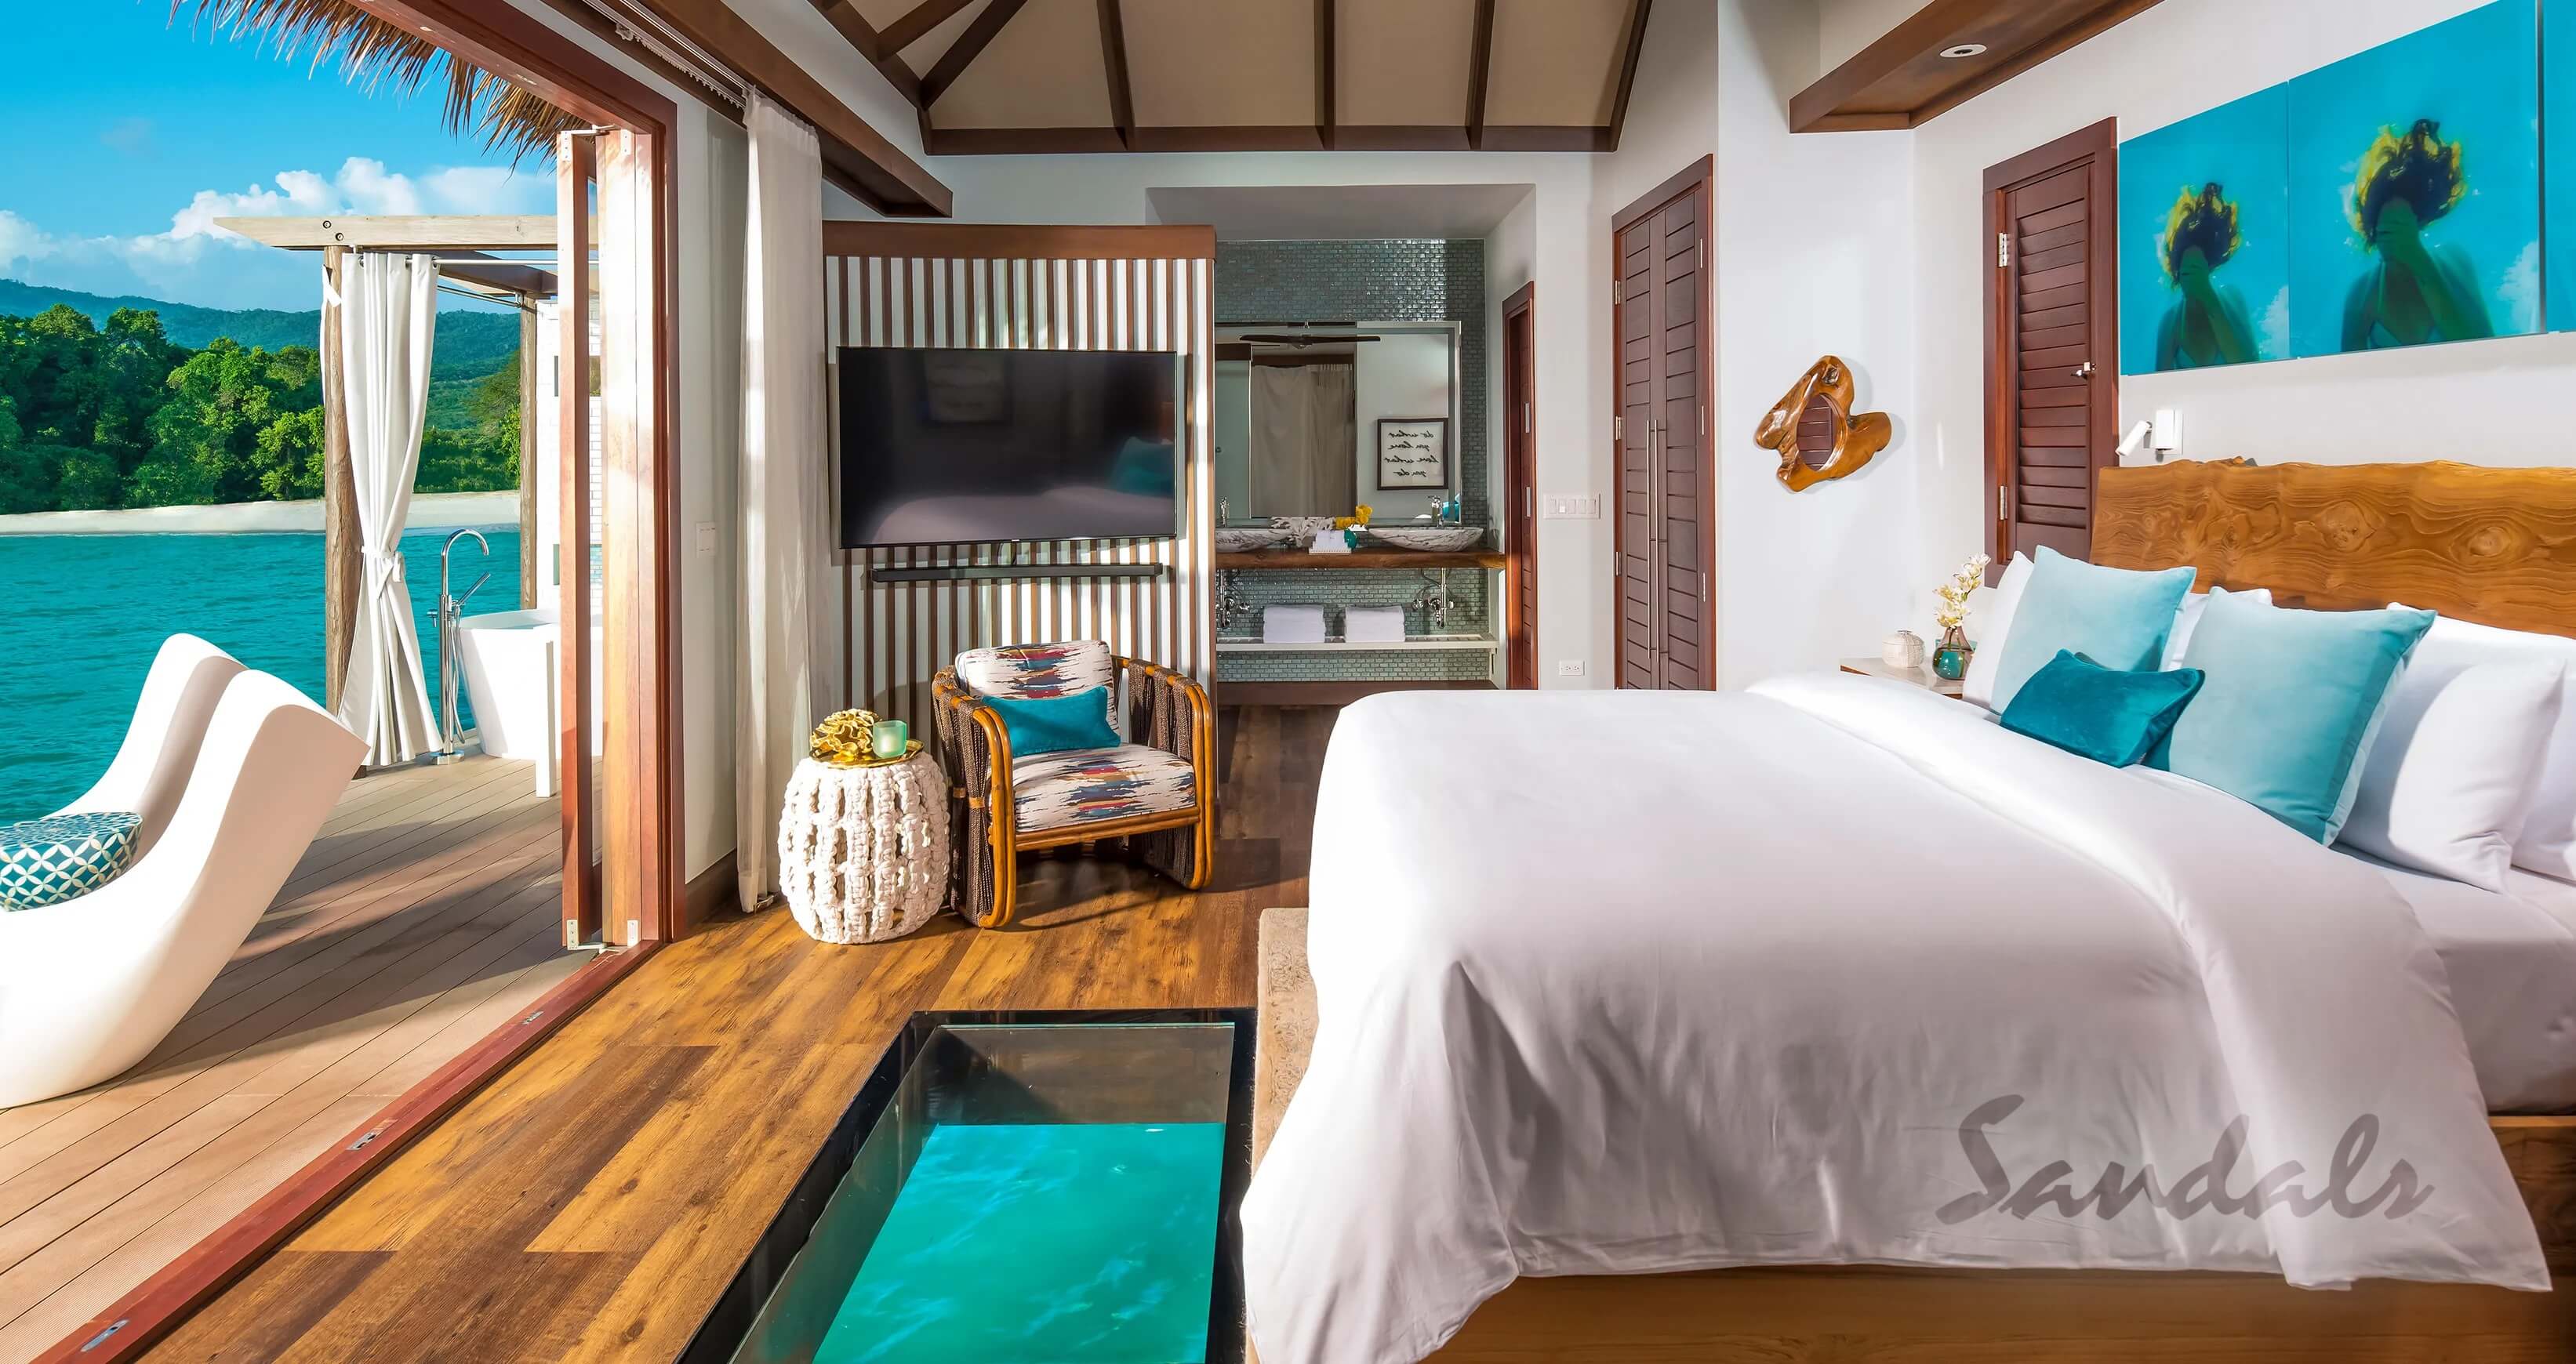 Overwater bungalow with clear floor to see tropical fish at Sandals resorts in Jamaica.